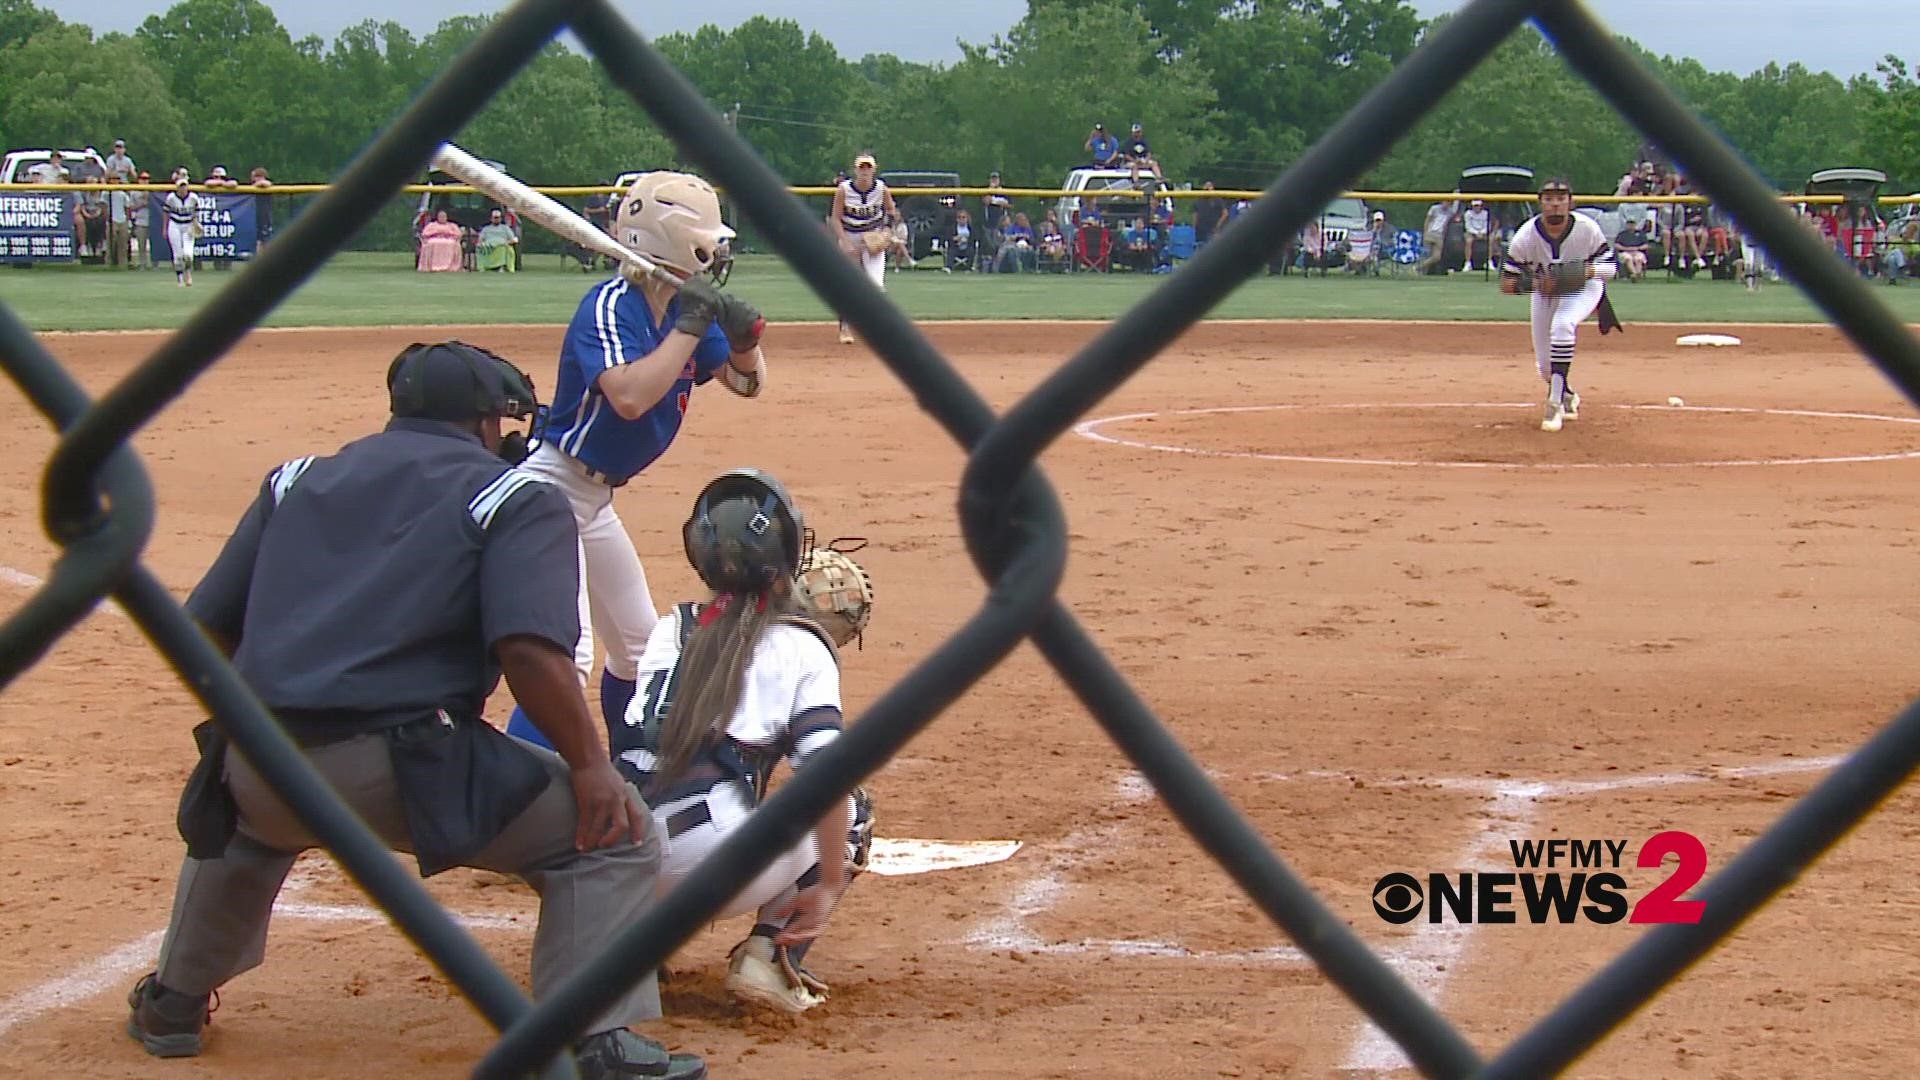 East Forsyth wins 8-0 and advances to the 4A Softball Championship Series.